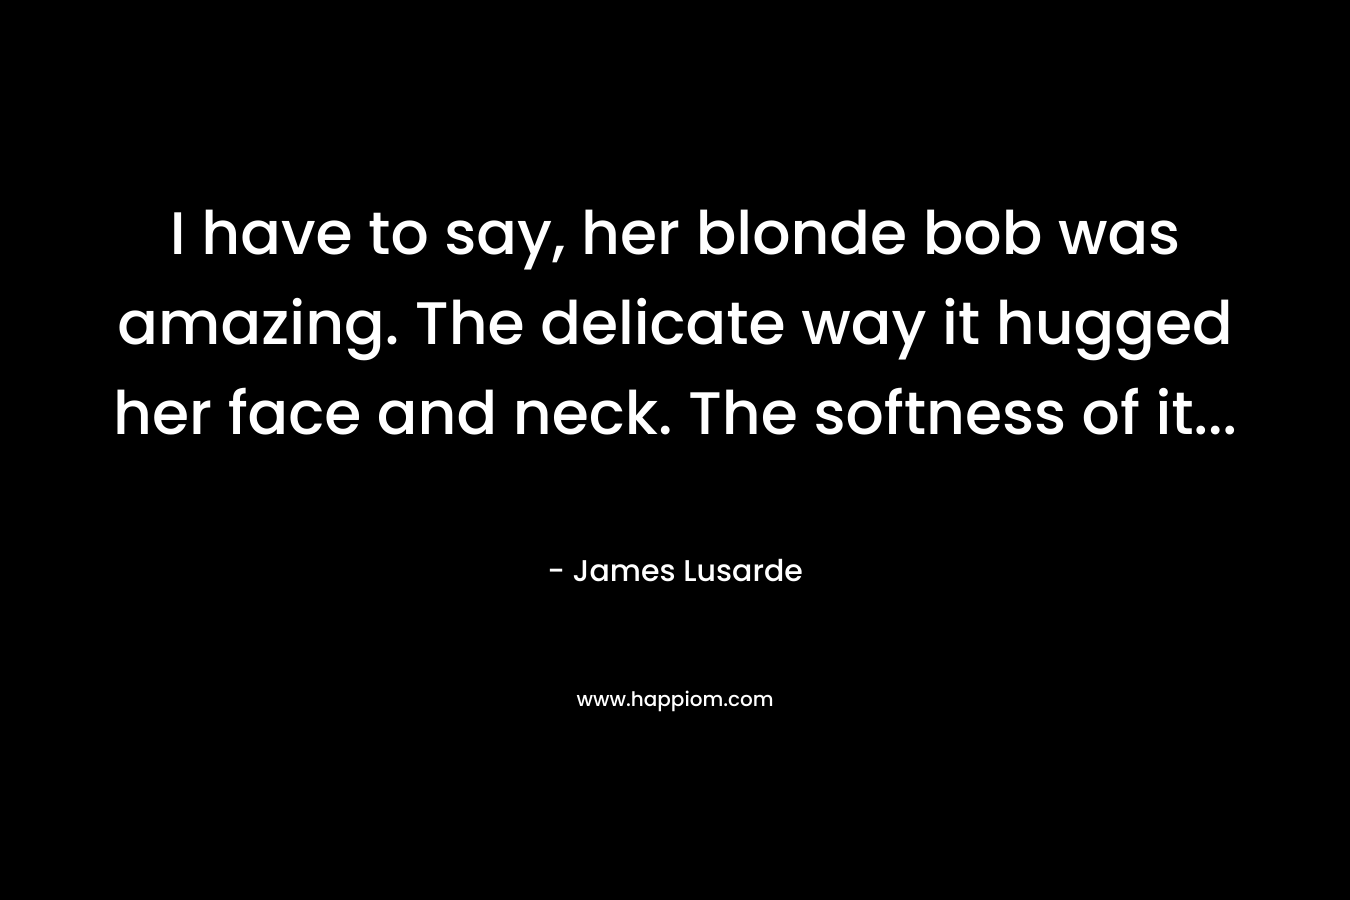 I have to say, her blonde bob was amazing. The delicate way it hugged her face and neck. The softness of it… – James Lusarde